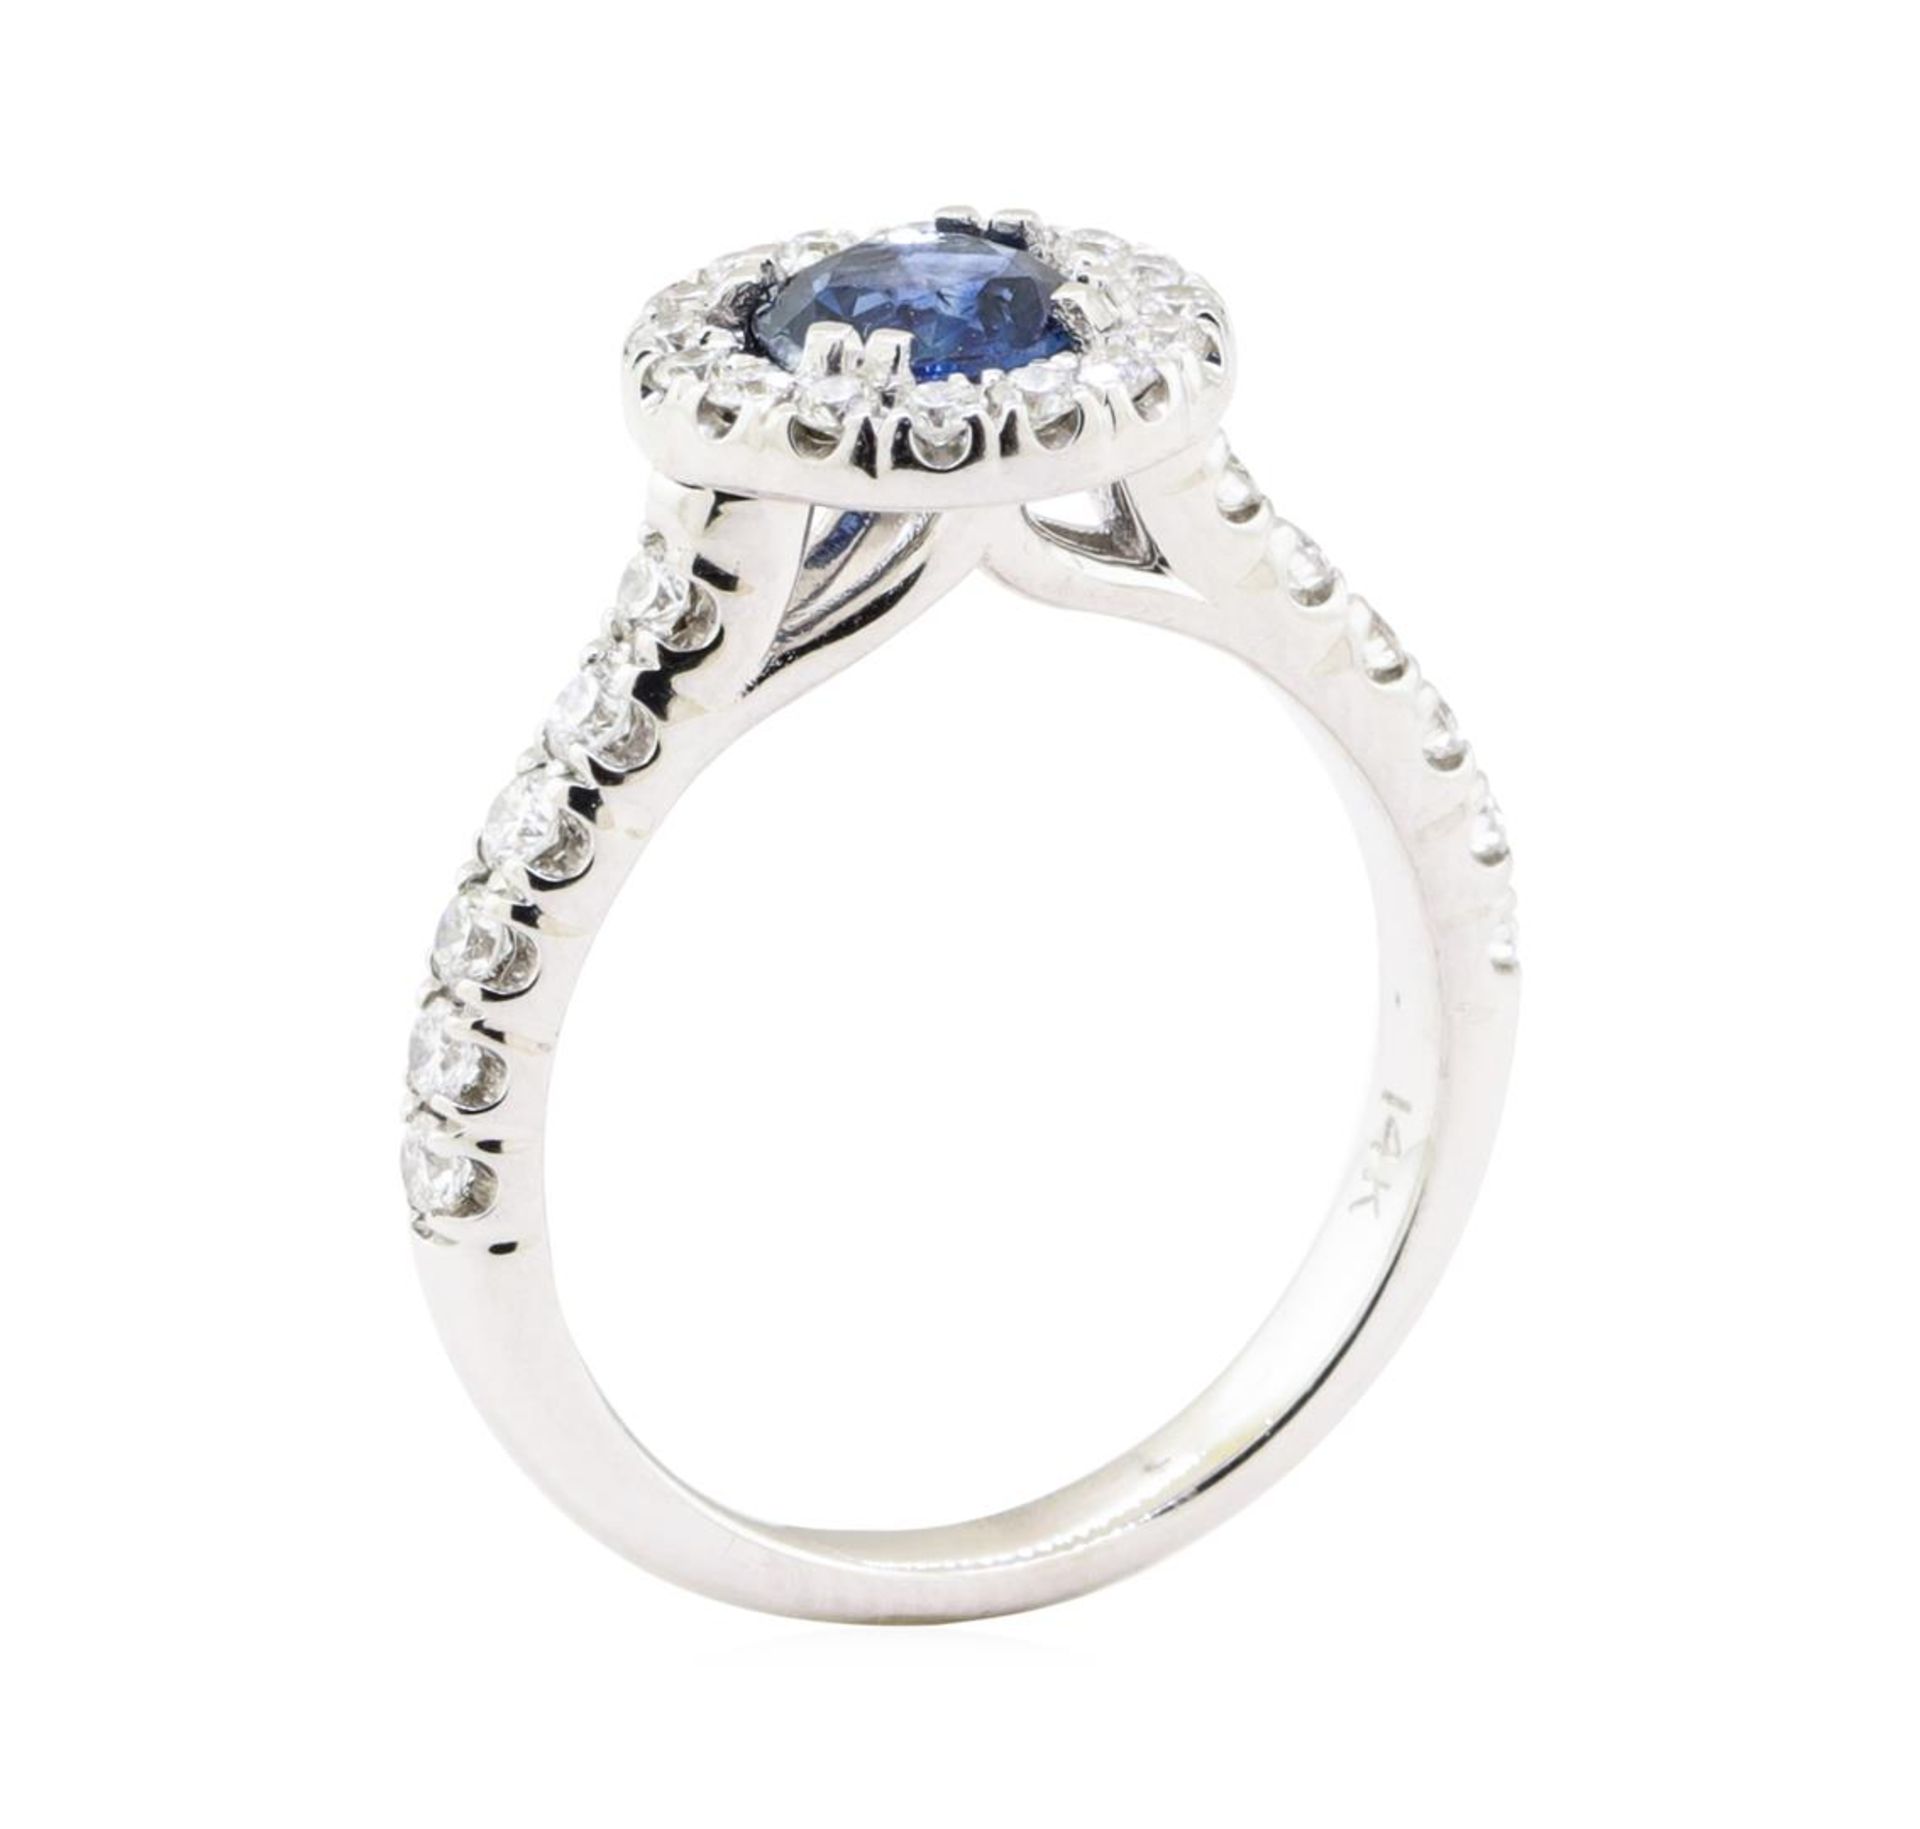 1.42 ctw Sapphire And Diamond Ring - 14KT White Gold - Image 8 of 10